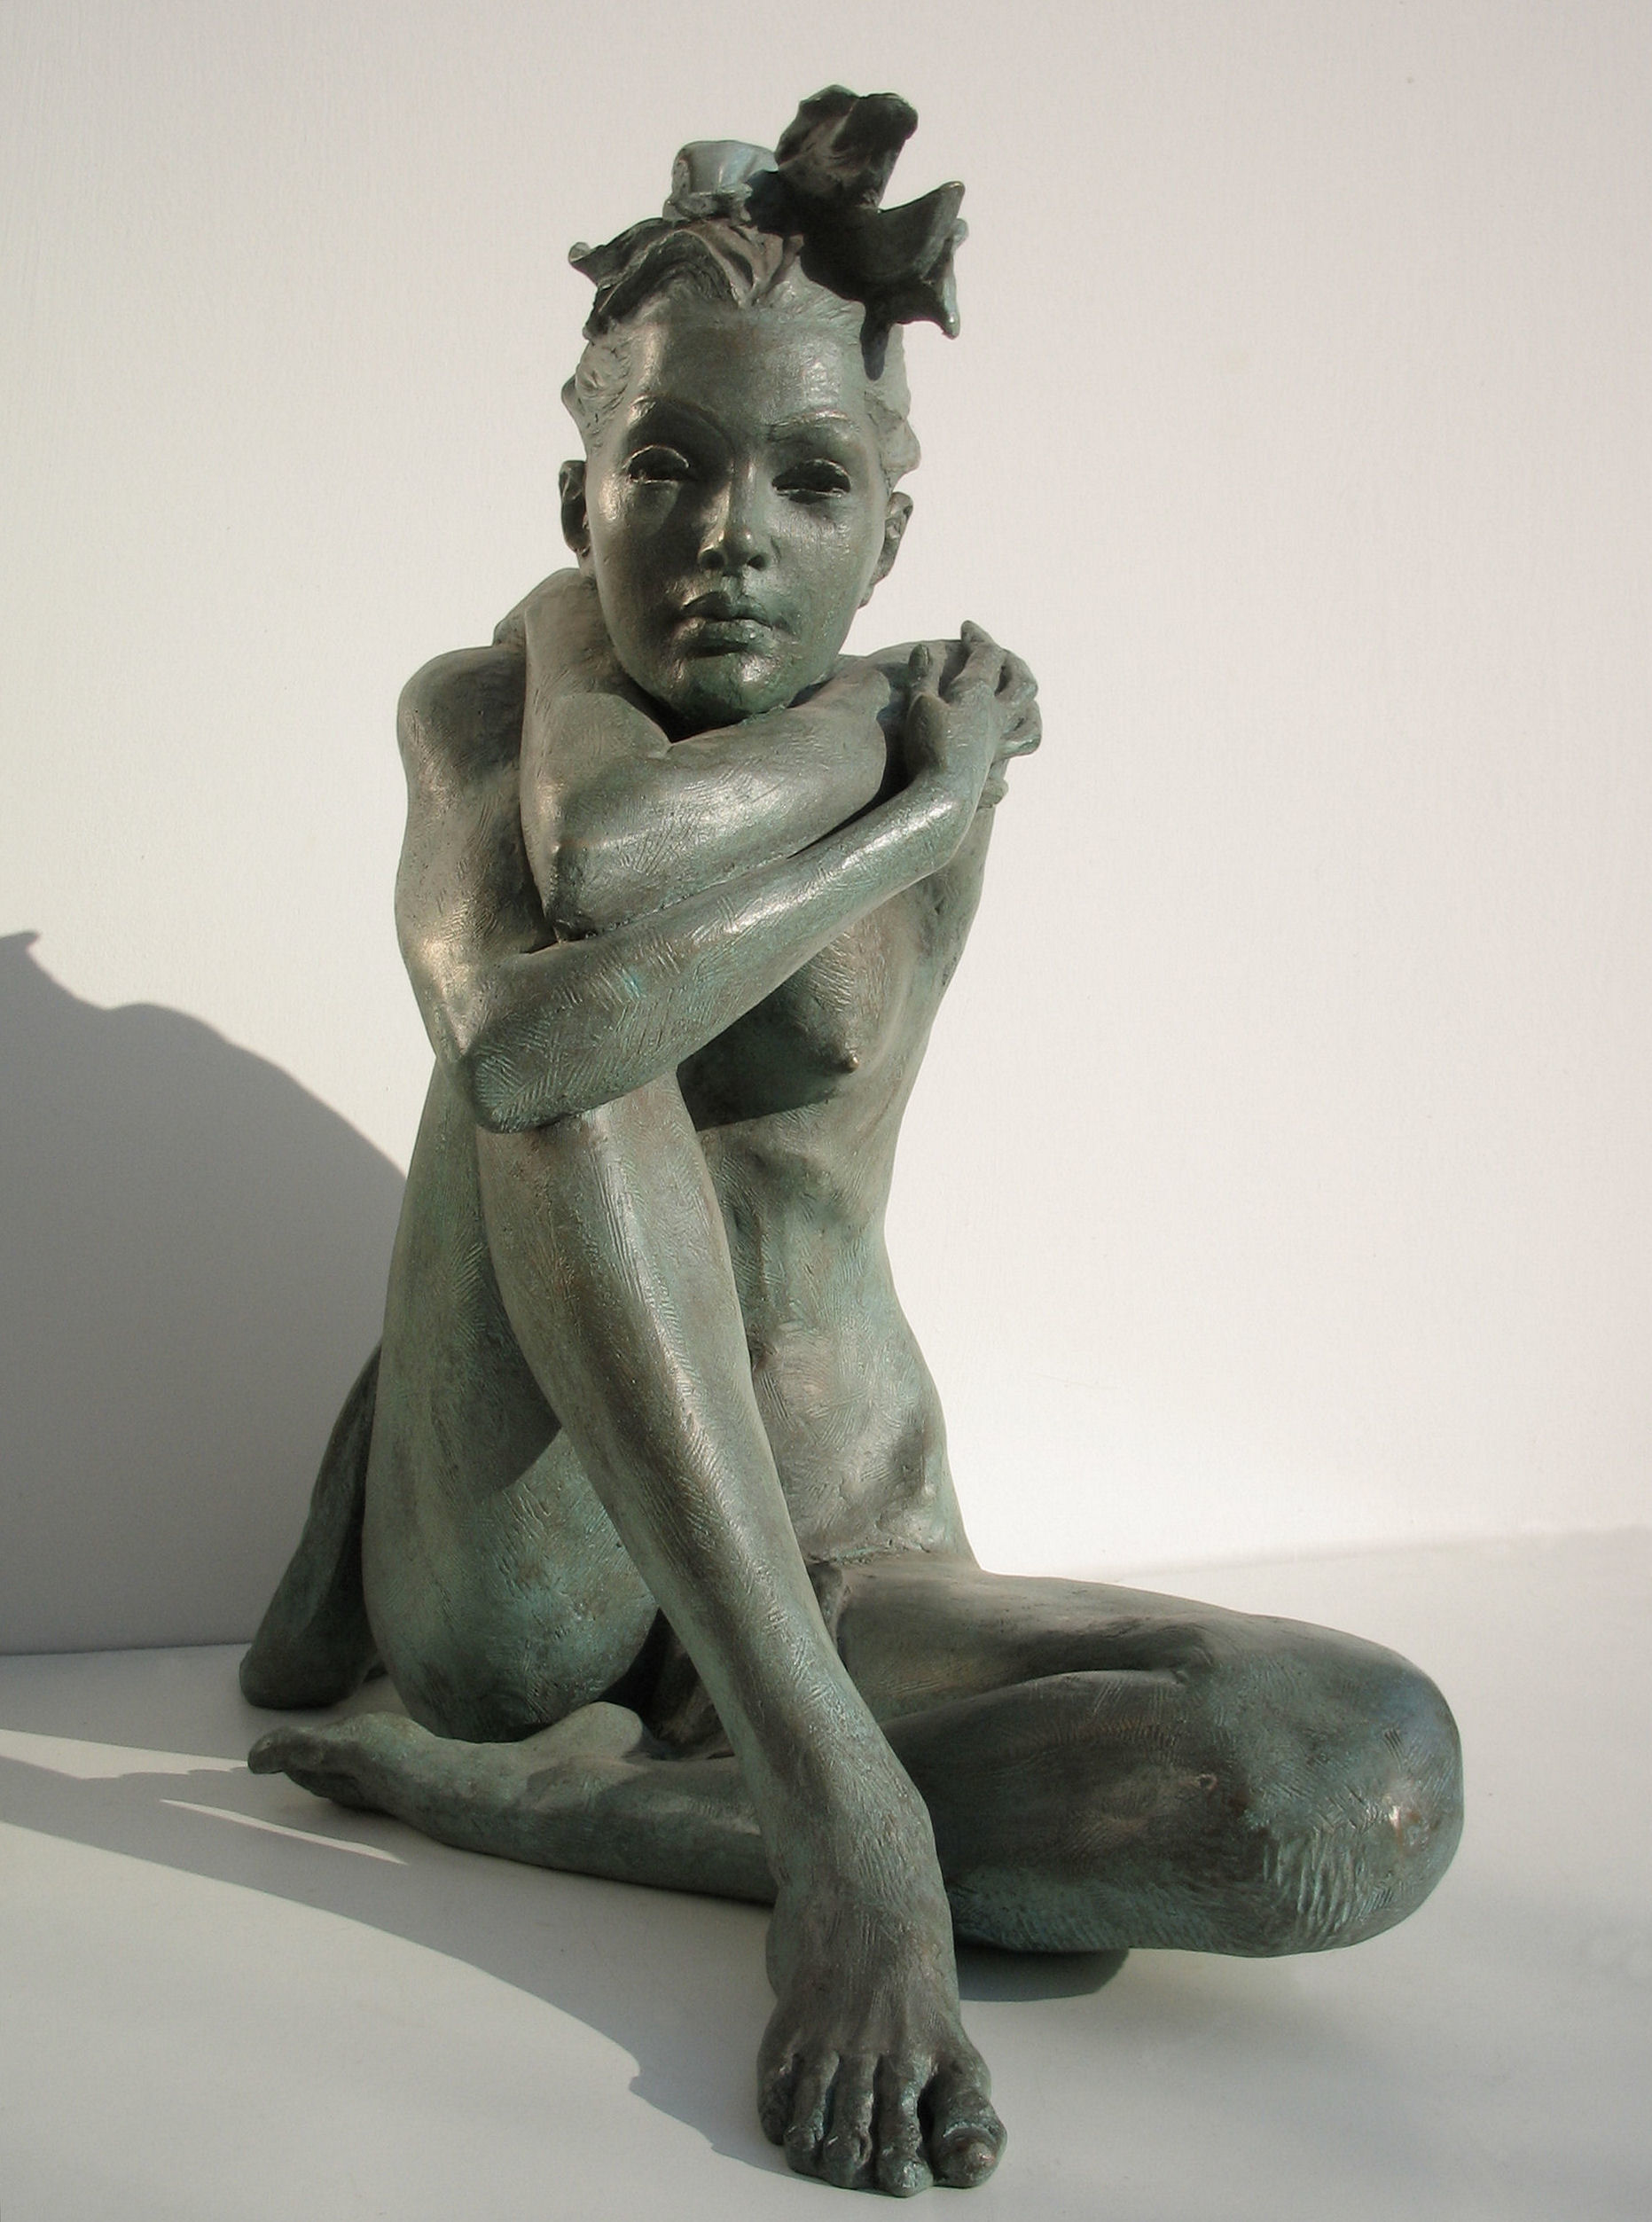 Bronze-statues-of-women-sculptures-artistic-female-nudes-code-85-a-Girl-In-Love-cm44x43x22-year-1998